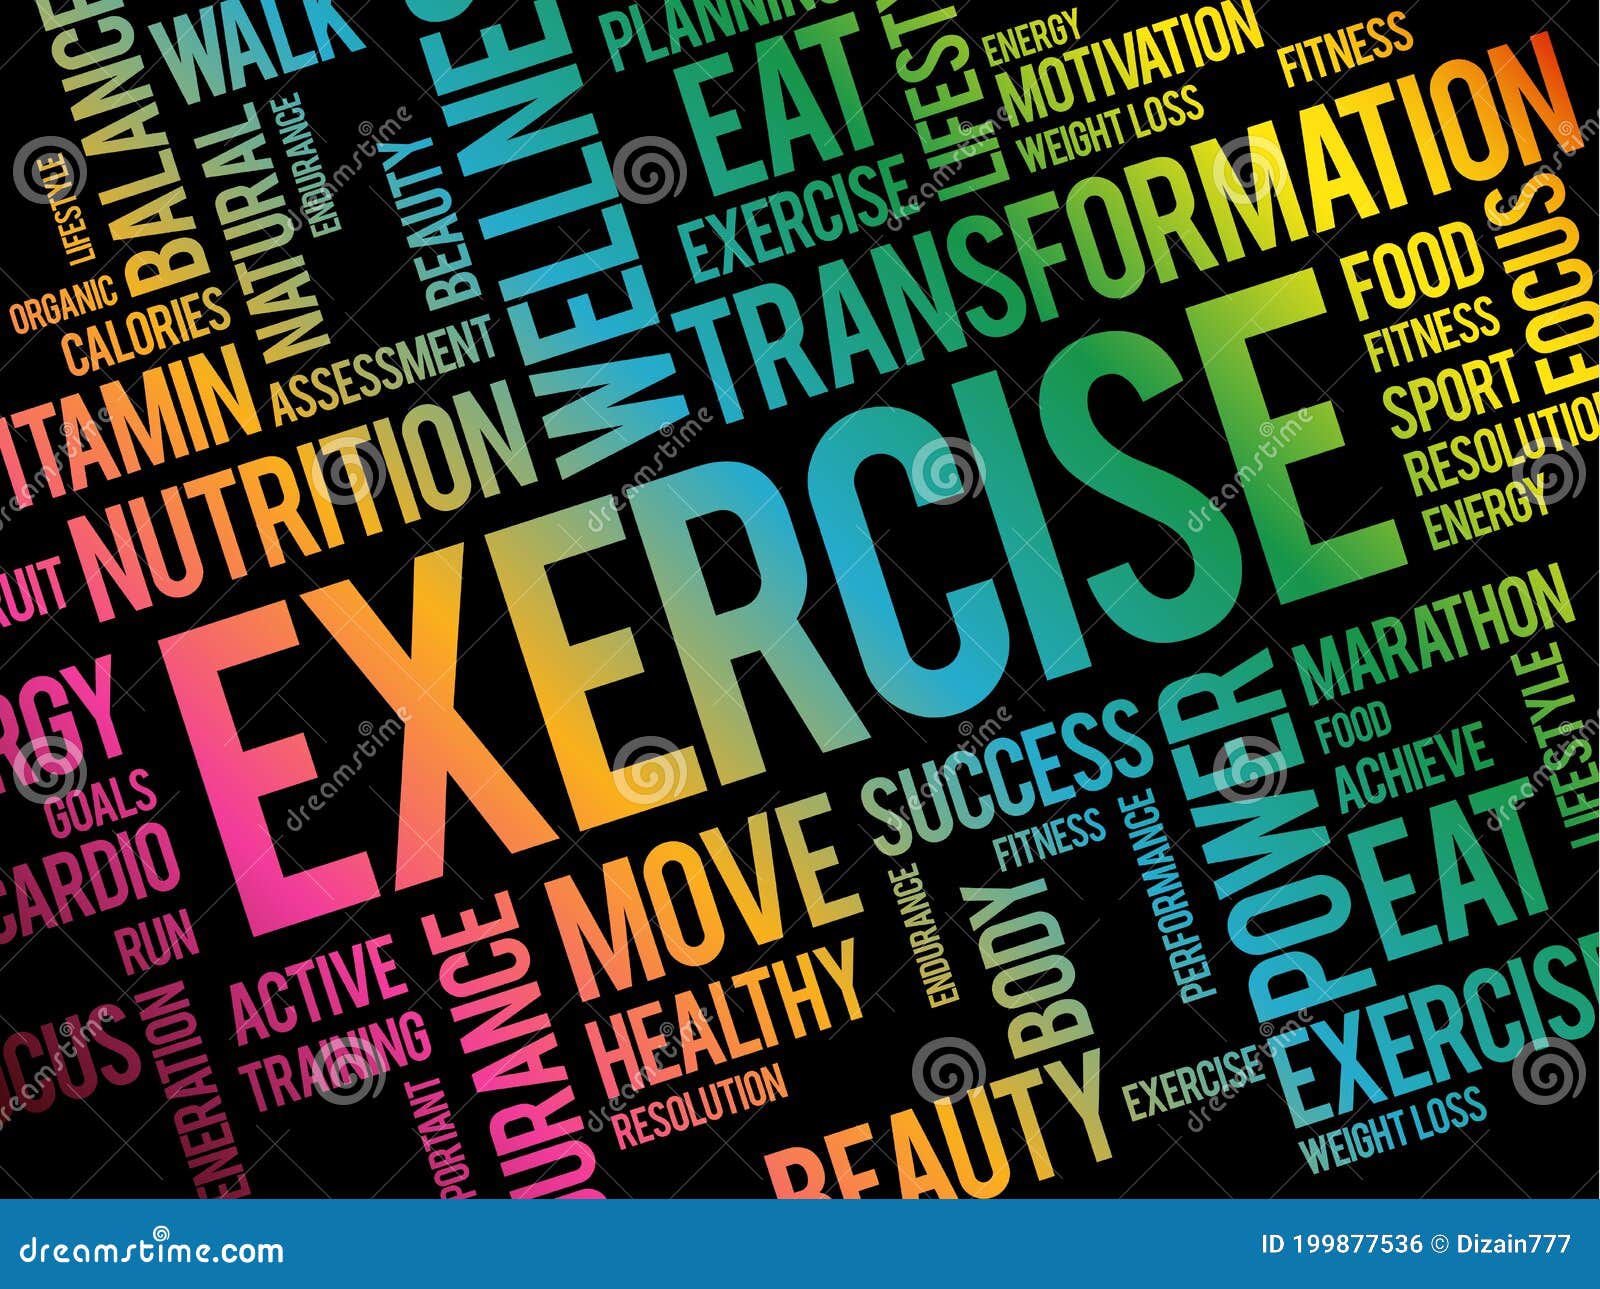 EXERCISE word cloud stock illustration. Illustration of physical ...